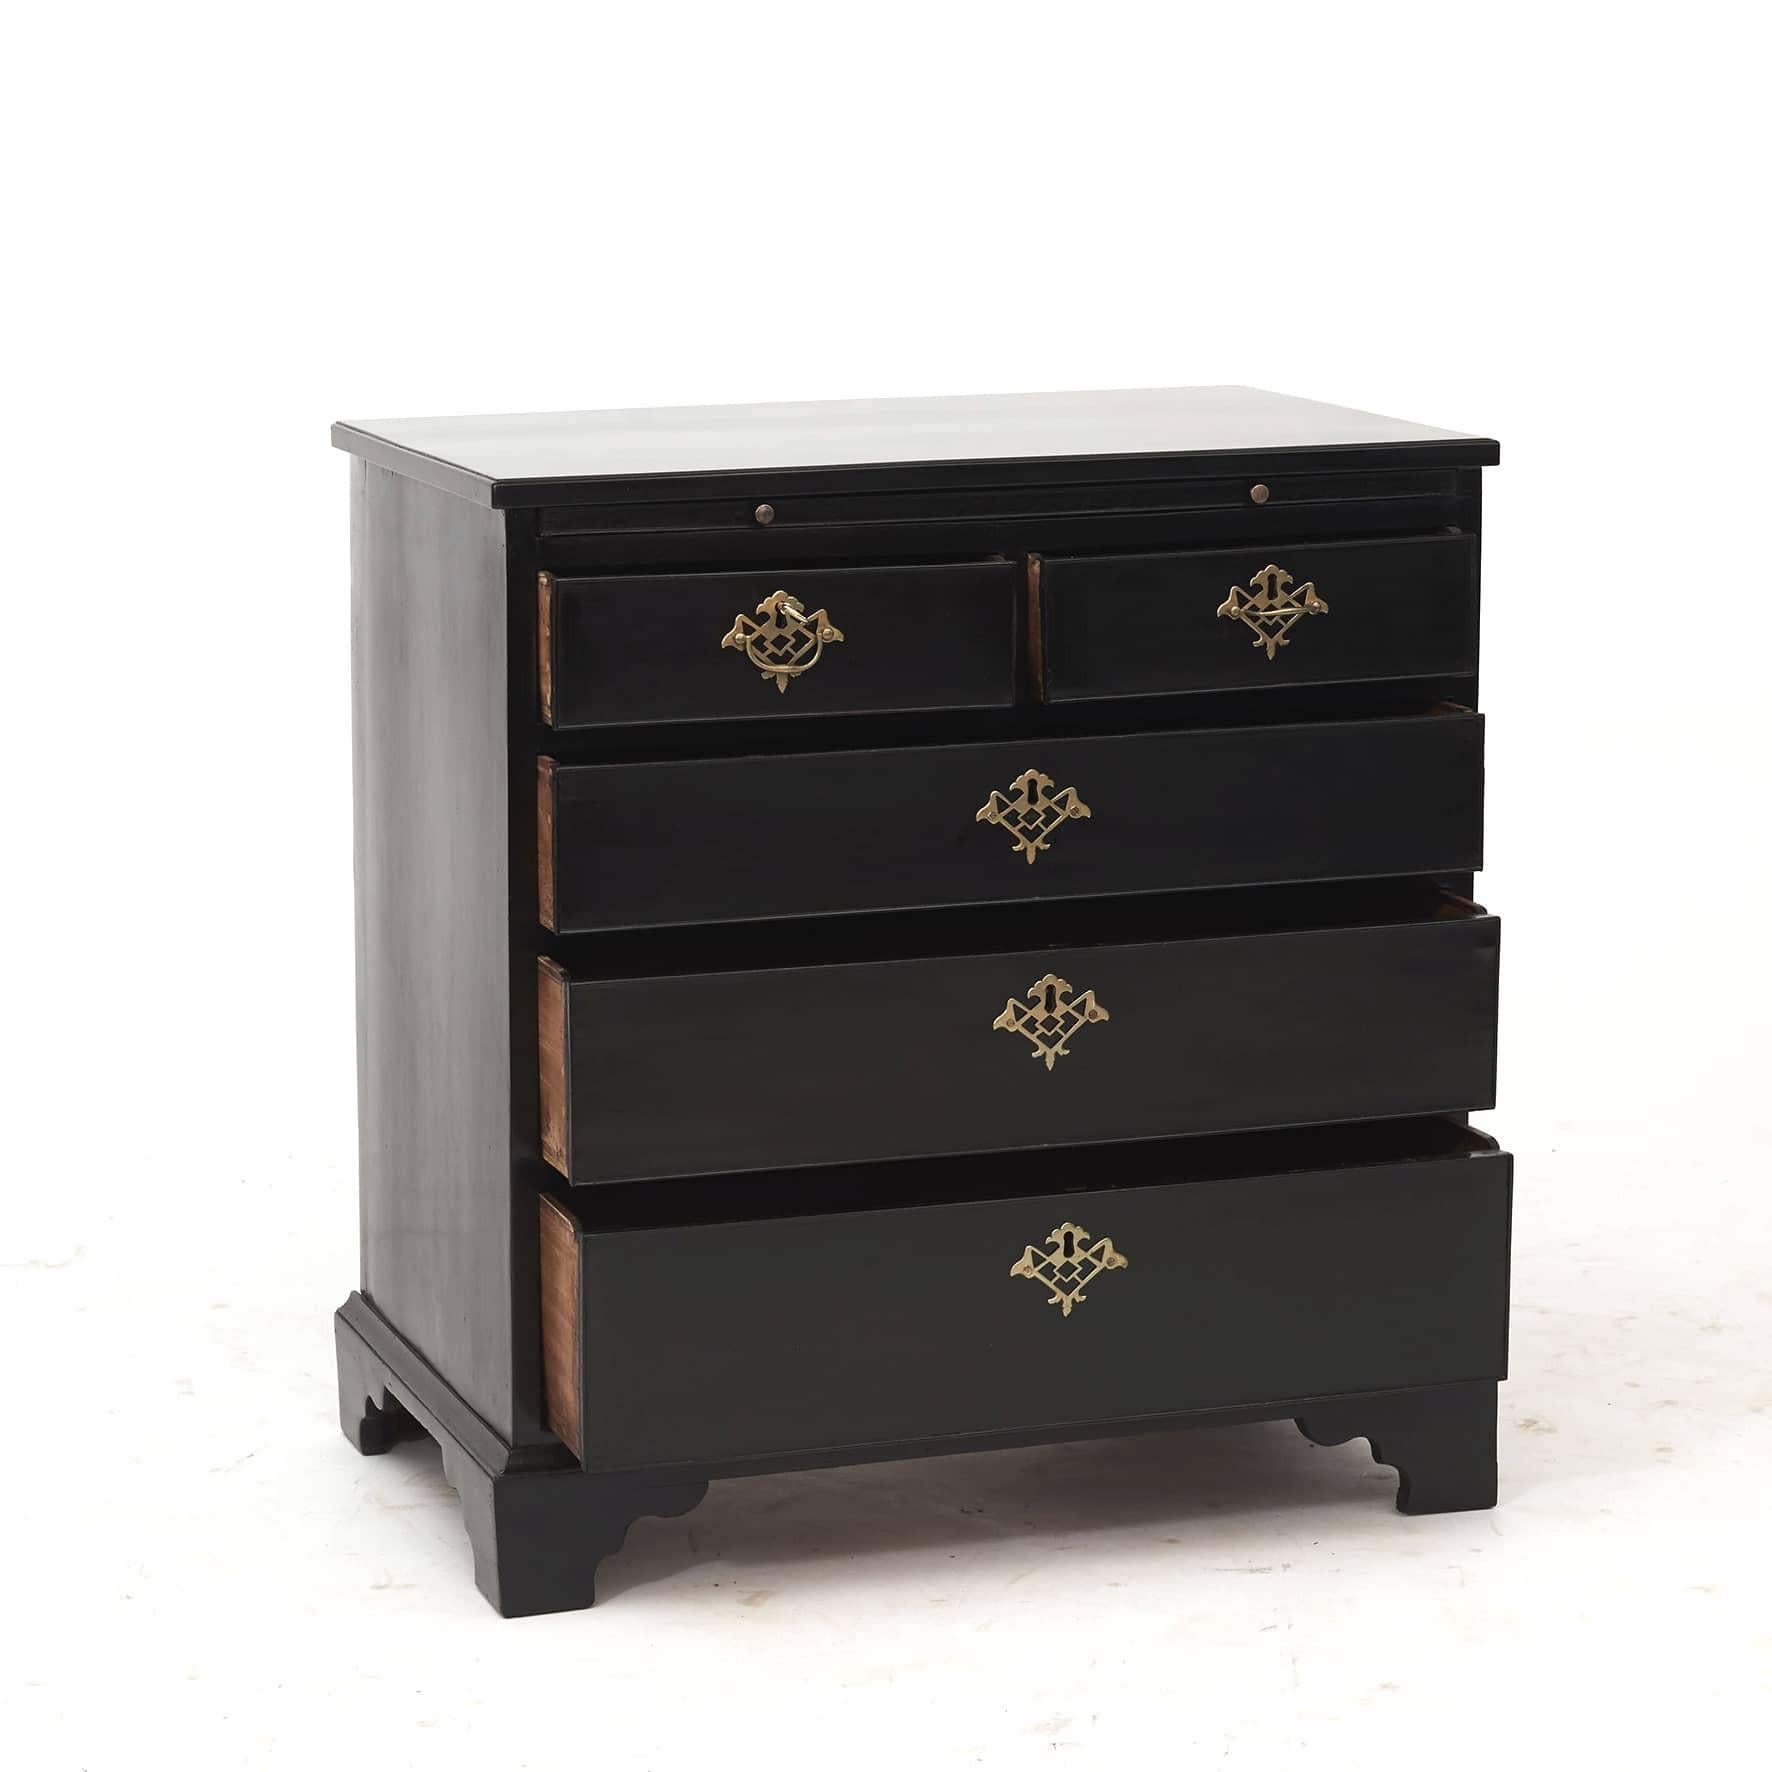 Regency chest of drawers in black polished mahogany.
Top with moulded edge, below an arrangement of 5 drawers: 2 smaller drawers over 3 drawers formation. Under the top an additional pull-out tray.

England 1810-1820.